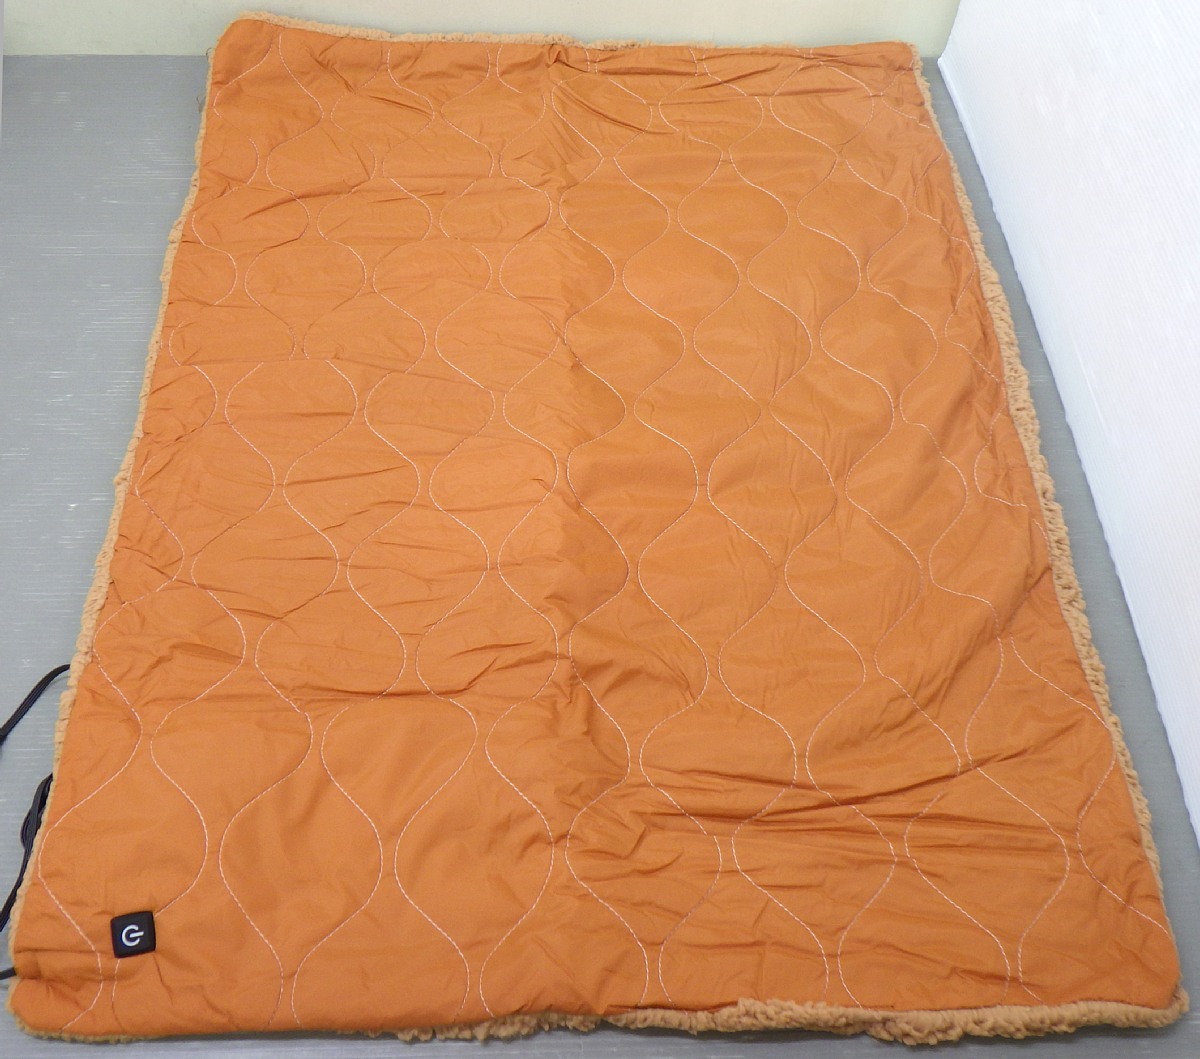  package damage Yuasa USB supply of electricity electric heating heater attaching portable electric blanket YCB-CU25C orange 90cm×60cm